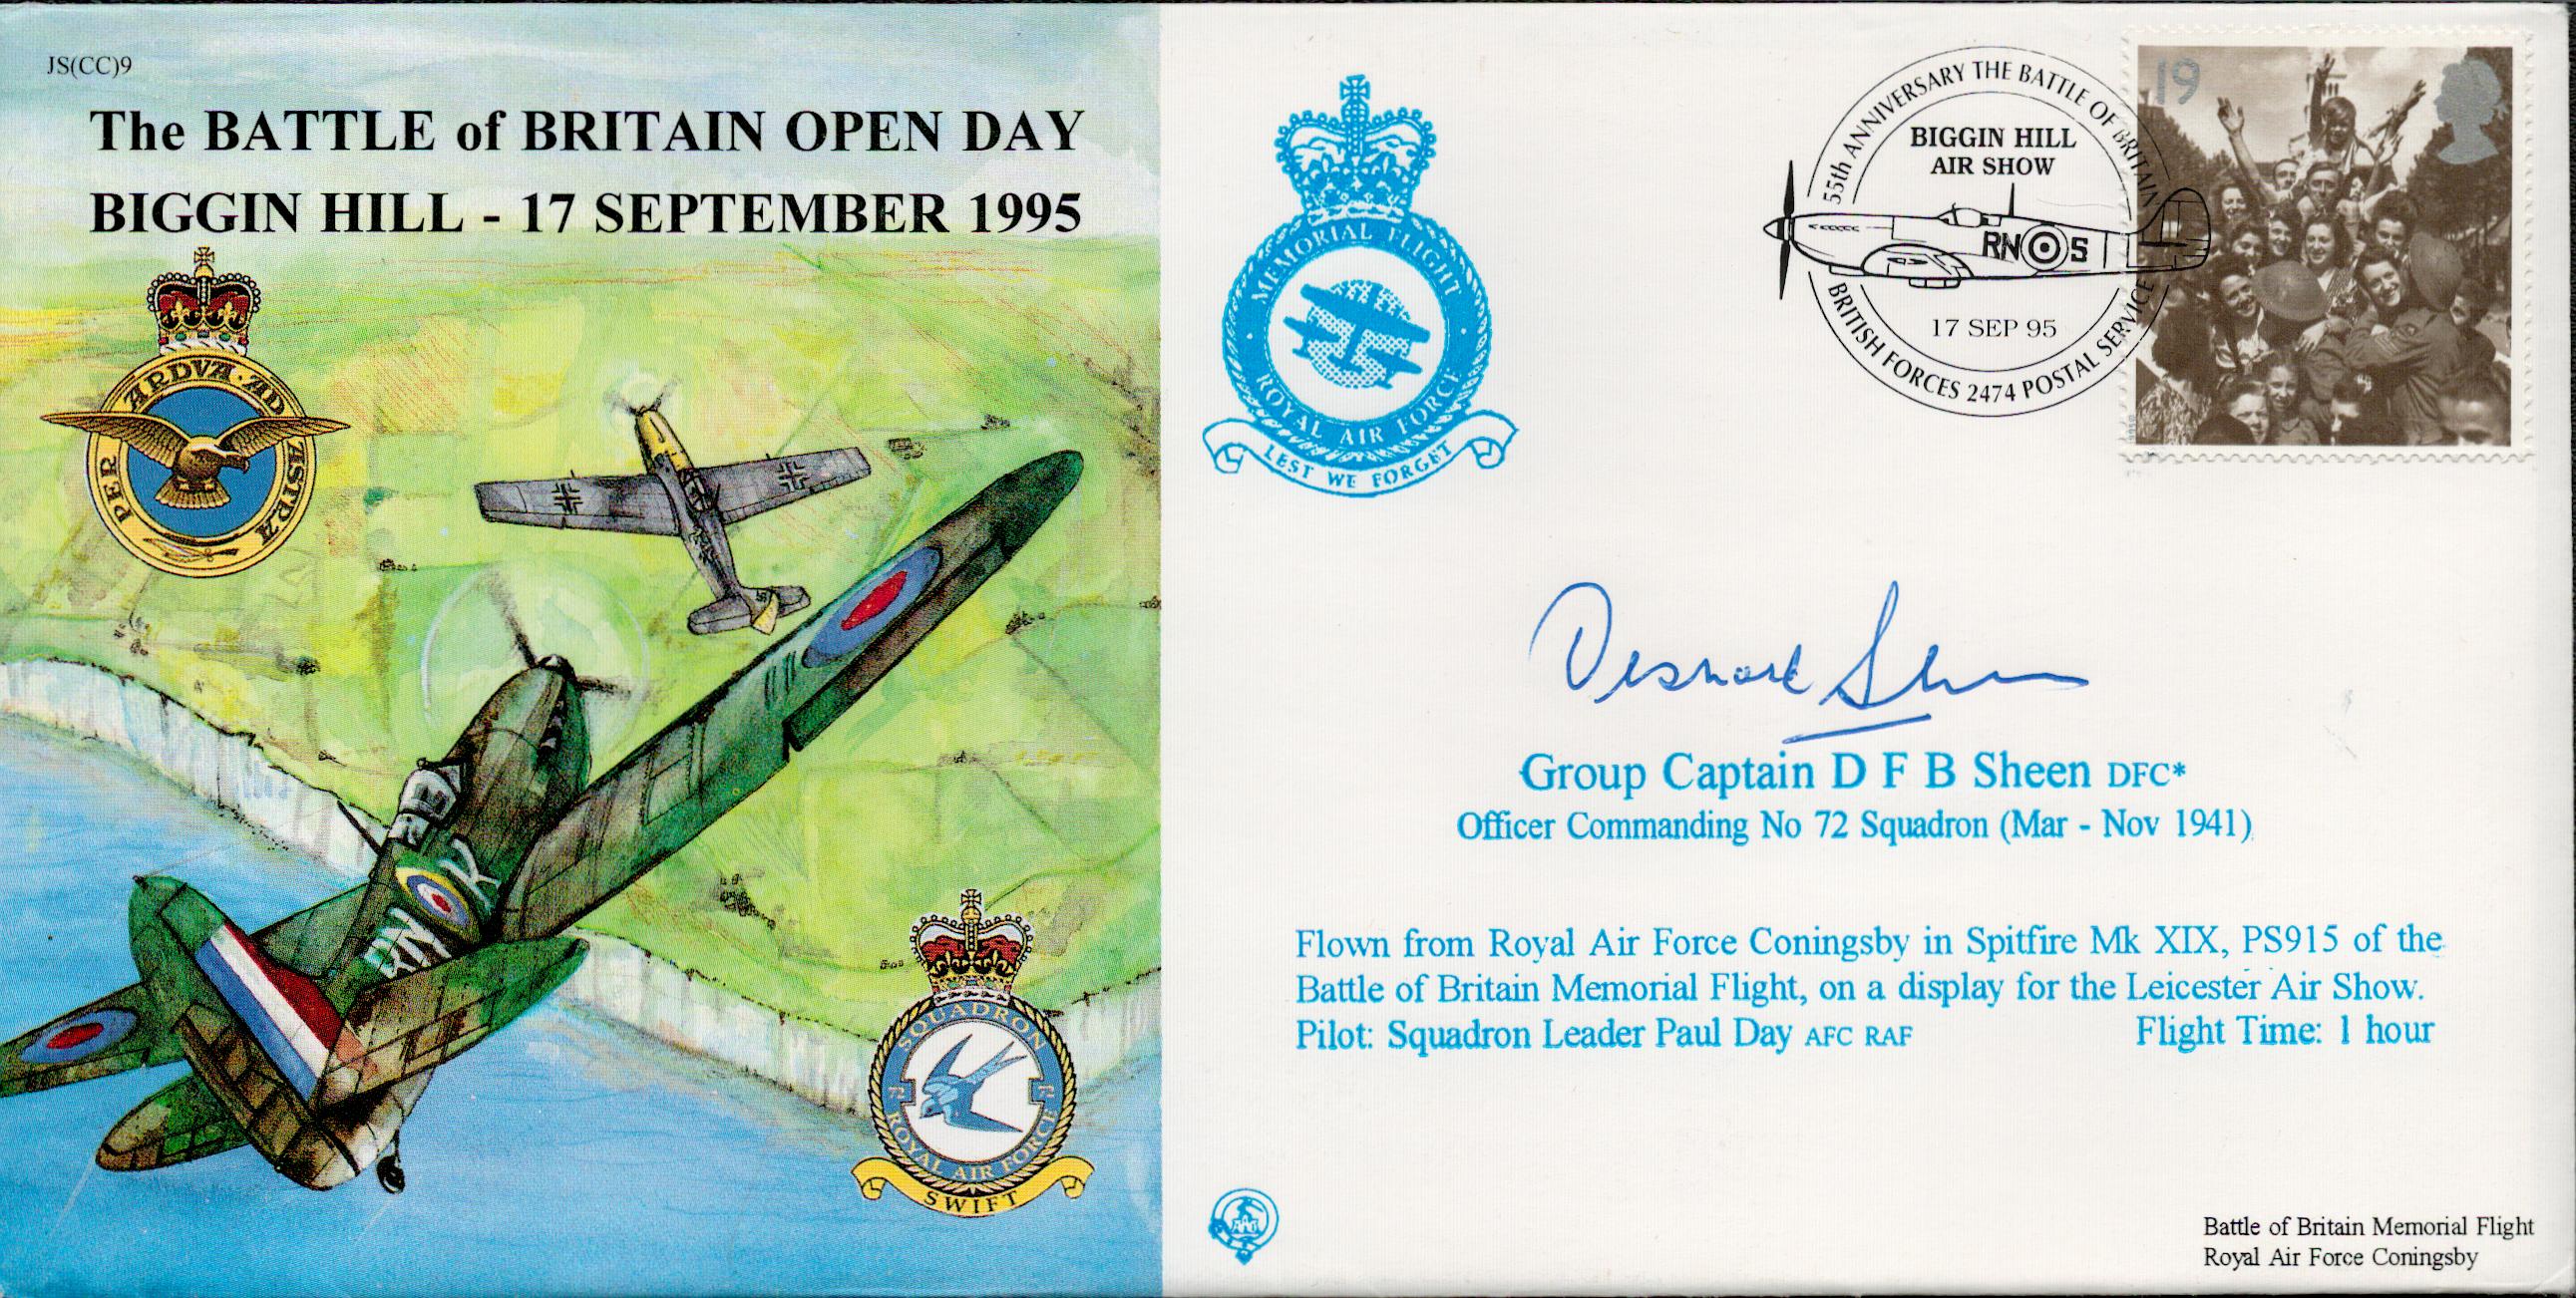 WW2 Grp Capt DFB Sheen DFC Signed The Battle of Britain Open Day Biggin Hill- 17th September 1995